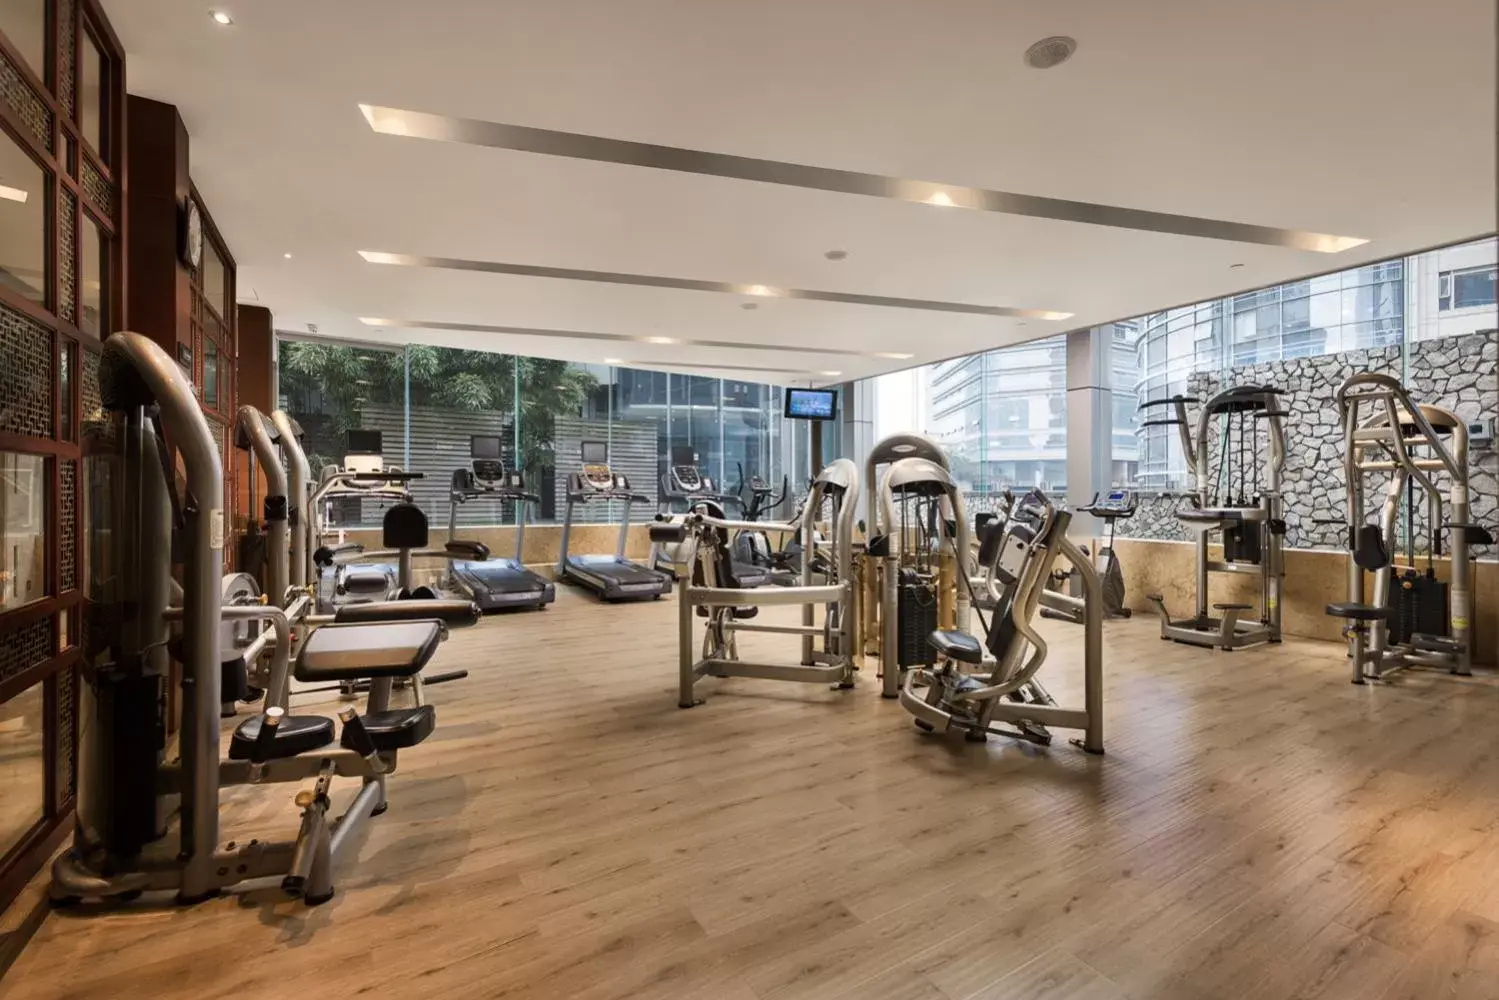 Fitness centre/facilities, Fitness Center/Facilities in Glenview ITC Plaza Chongqing